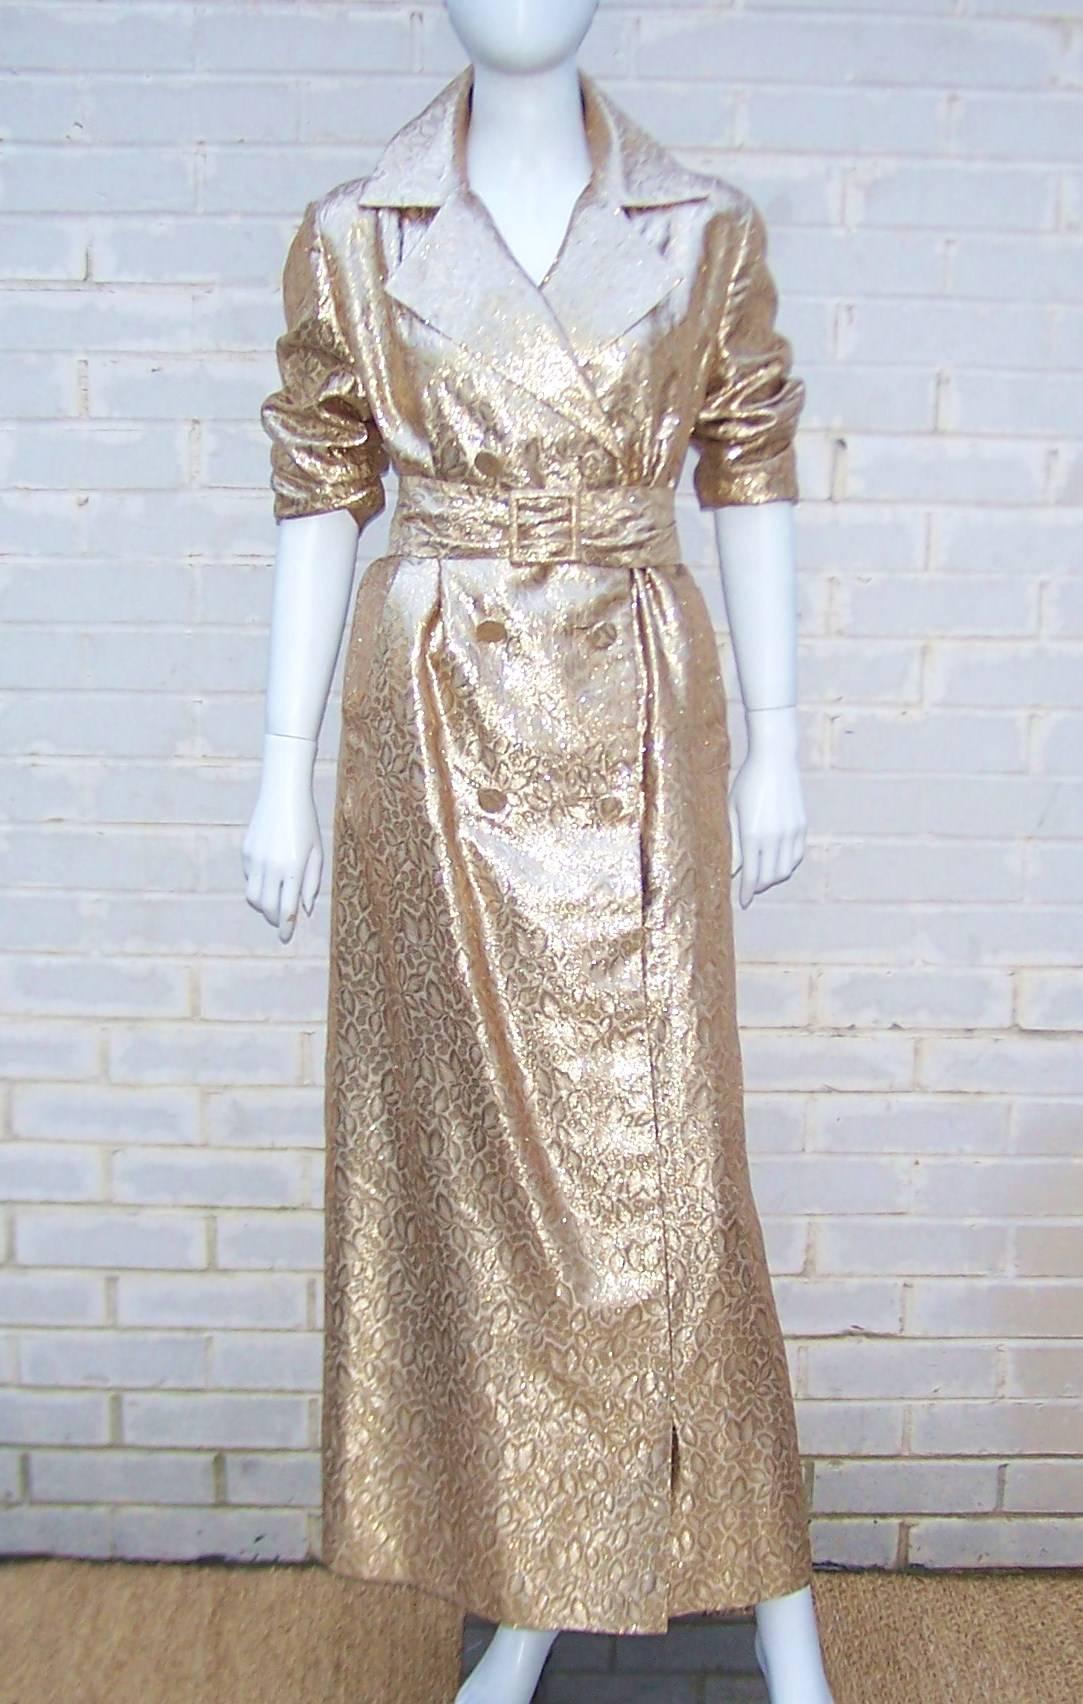 Gotta date with Goldfinger?  At least dress the part in this fun gold lame trench coat style dress by Lawrence of London.  The gold lame fabric has a foliage jacquard print for added visual interest.  The double breasted design has a built in 3